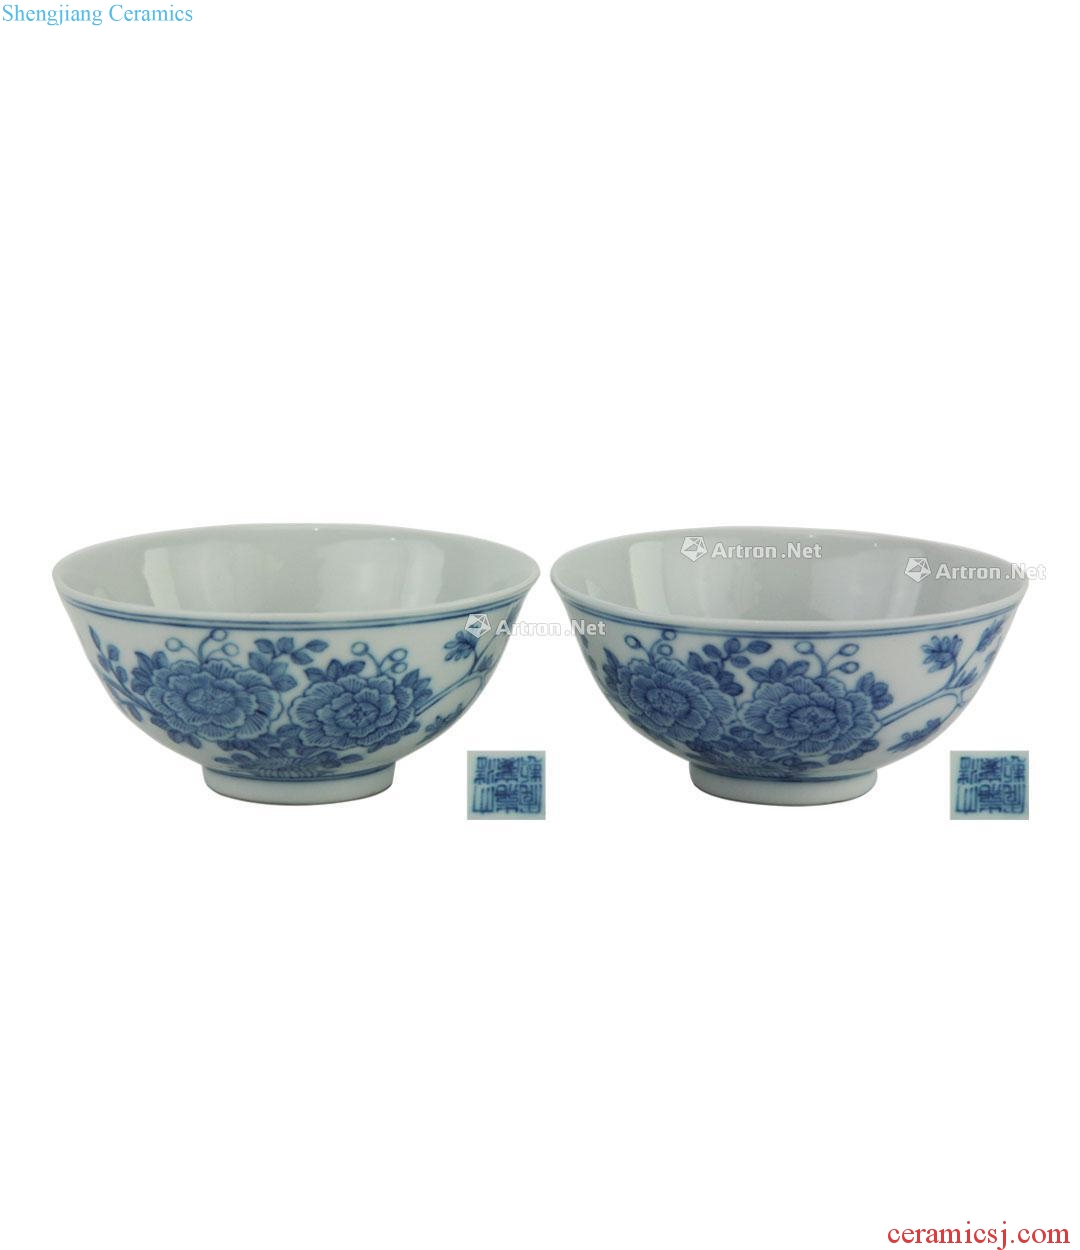 jiaqing Blue and white flowers green-splashed bowls (a)